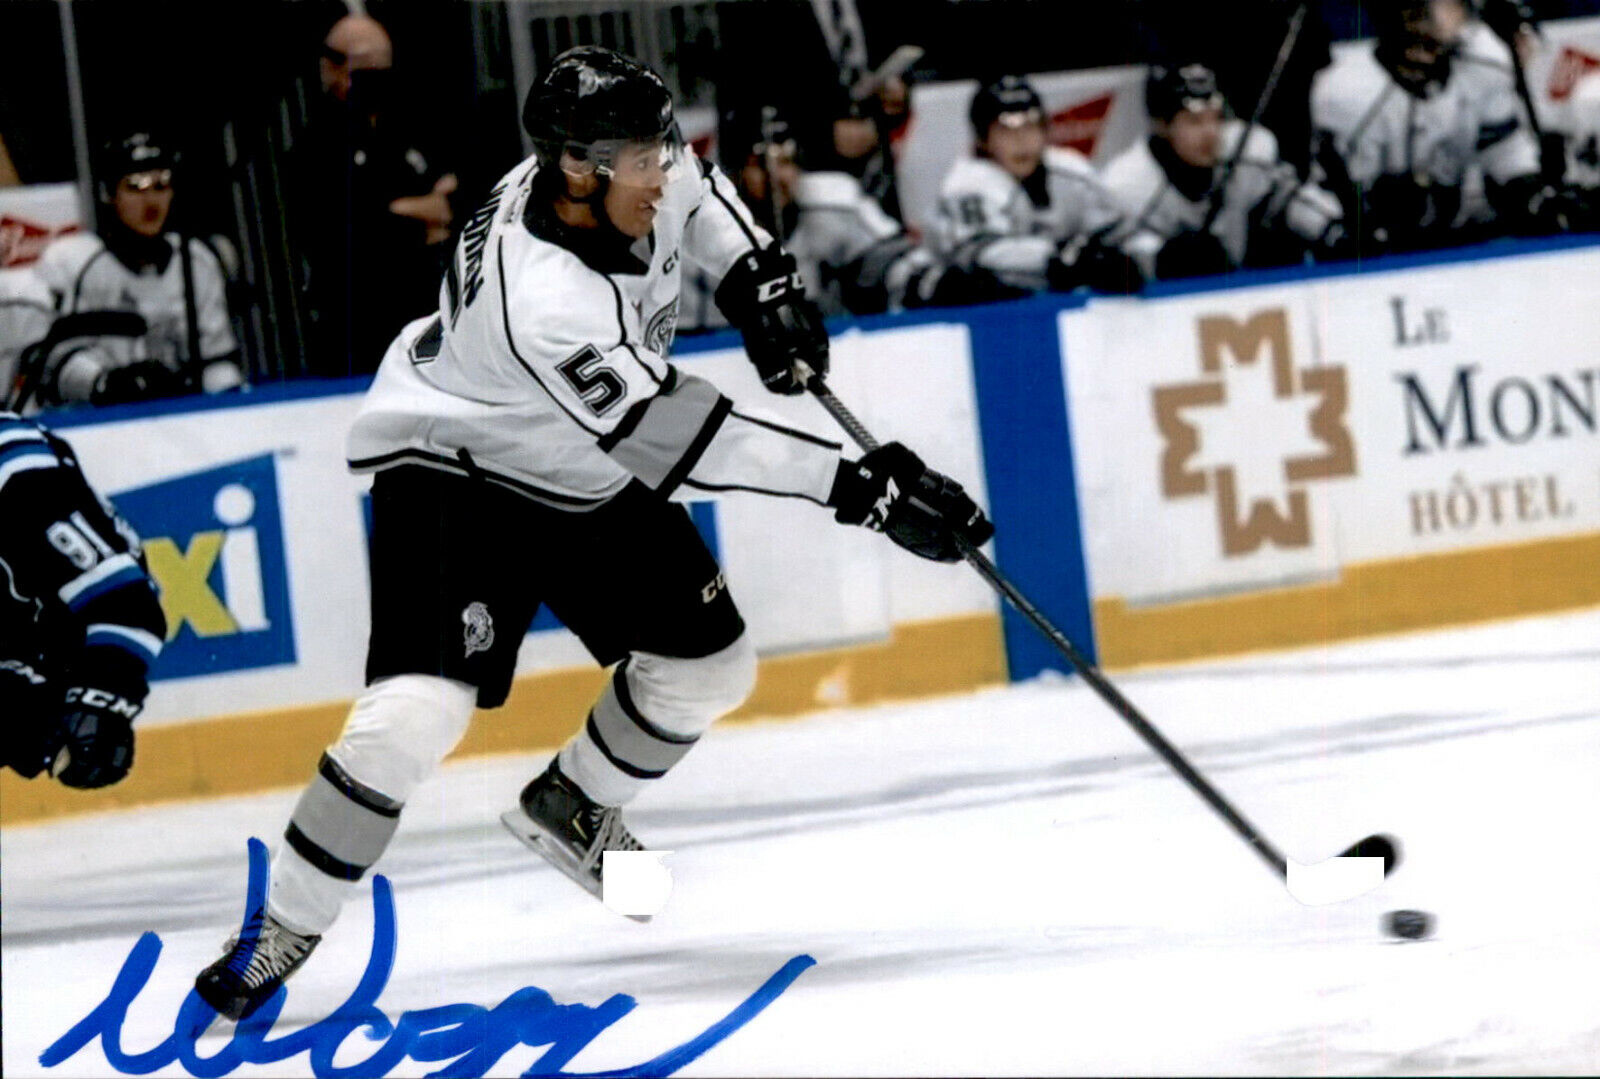 Noah Warren SIGNED autographed 4x6 Photo Poster painting GATINEAU OLYMPIQUES / NHL DRAFT 2022 #3